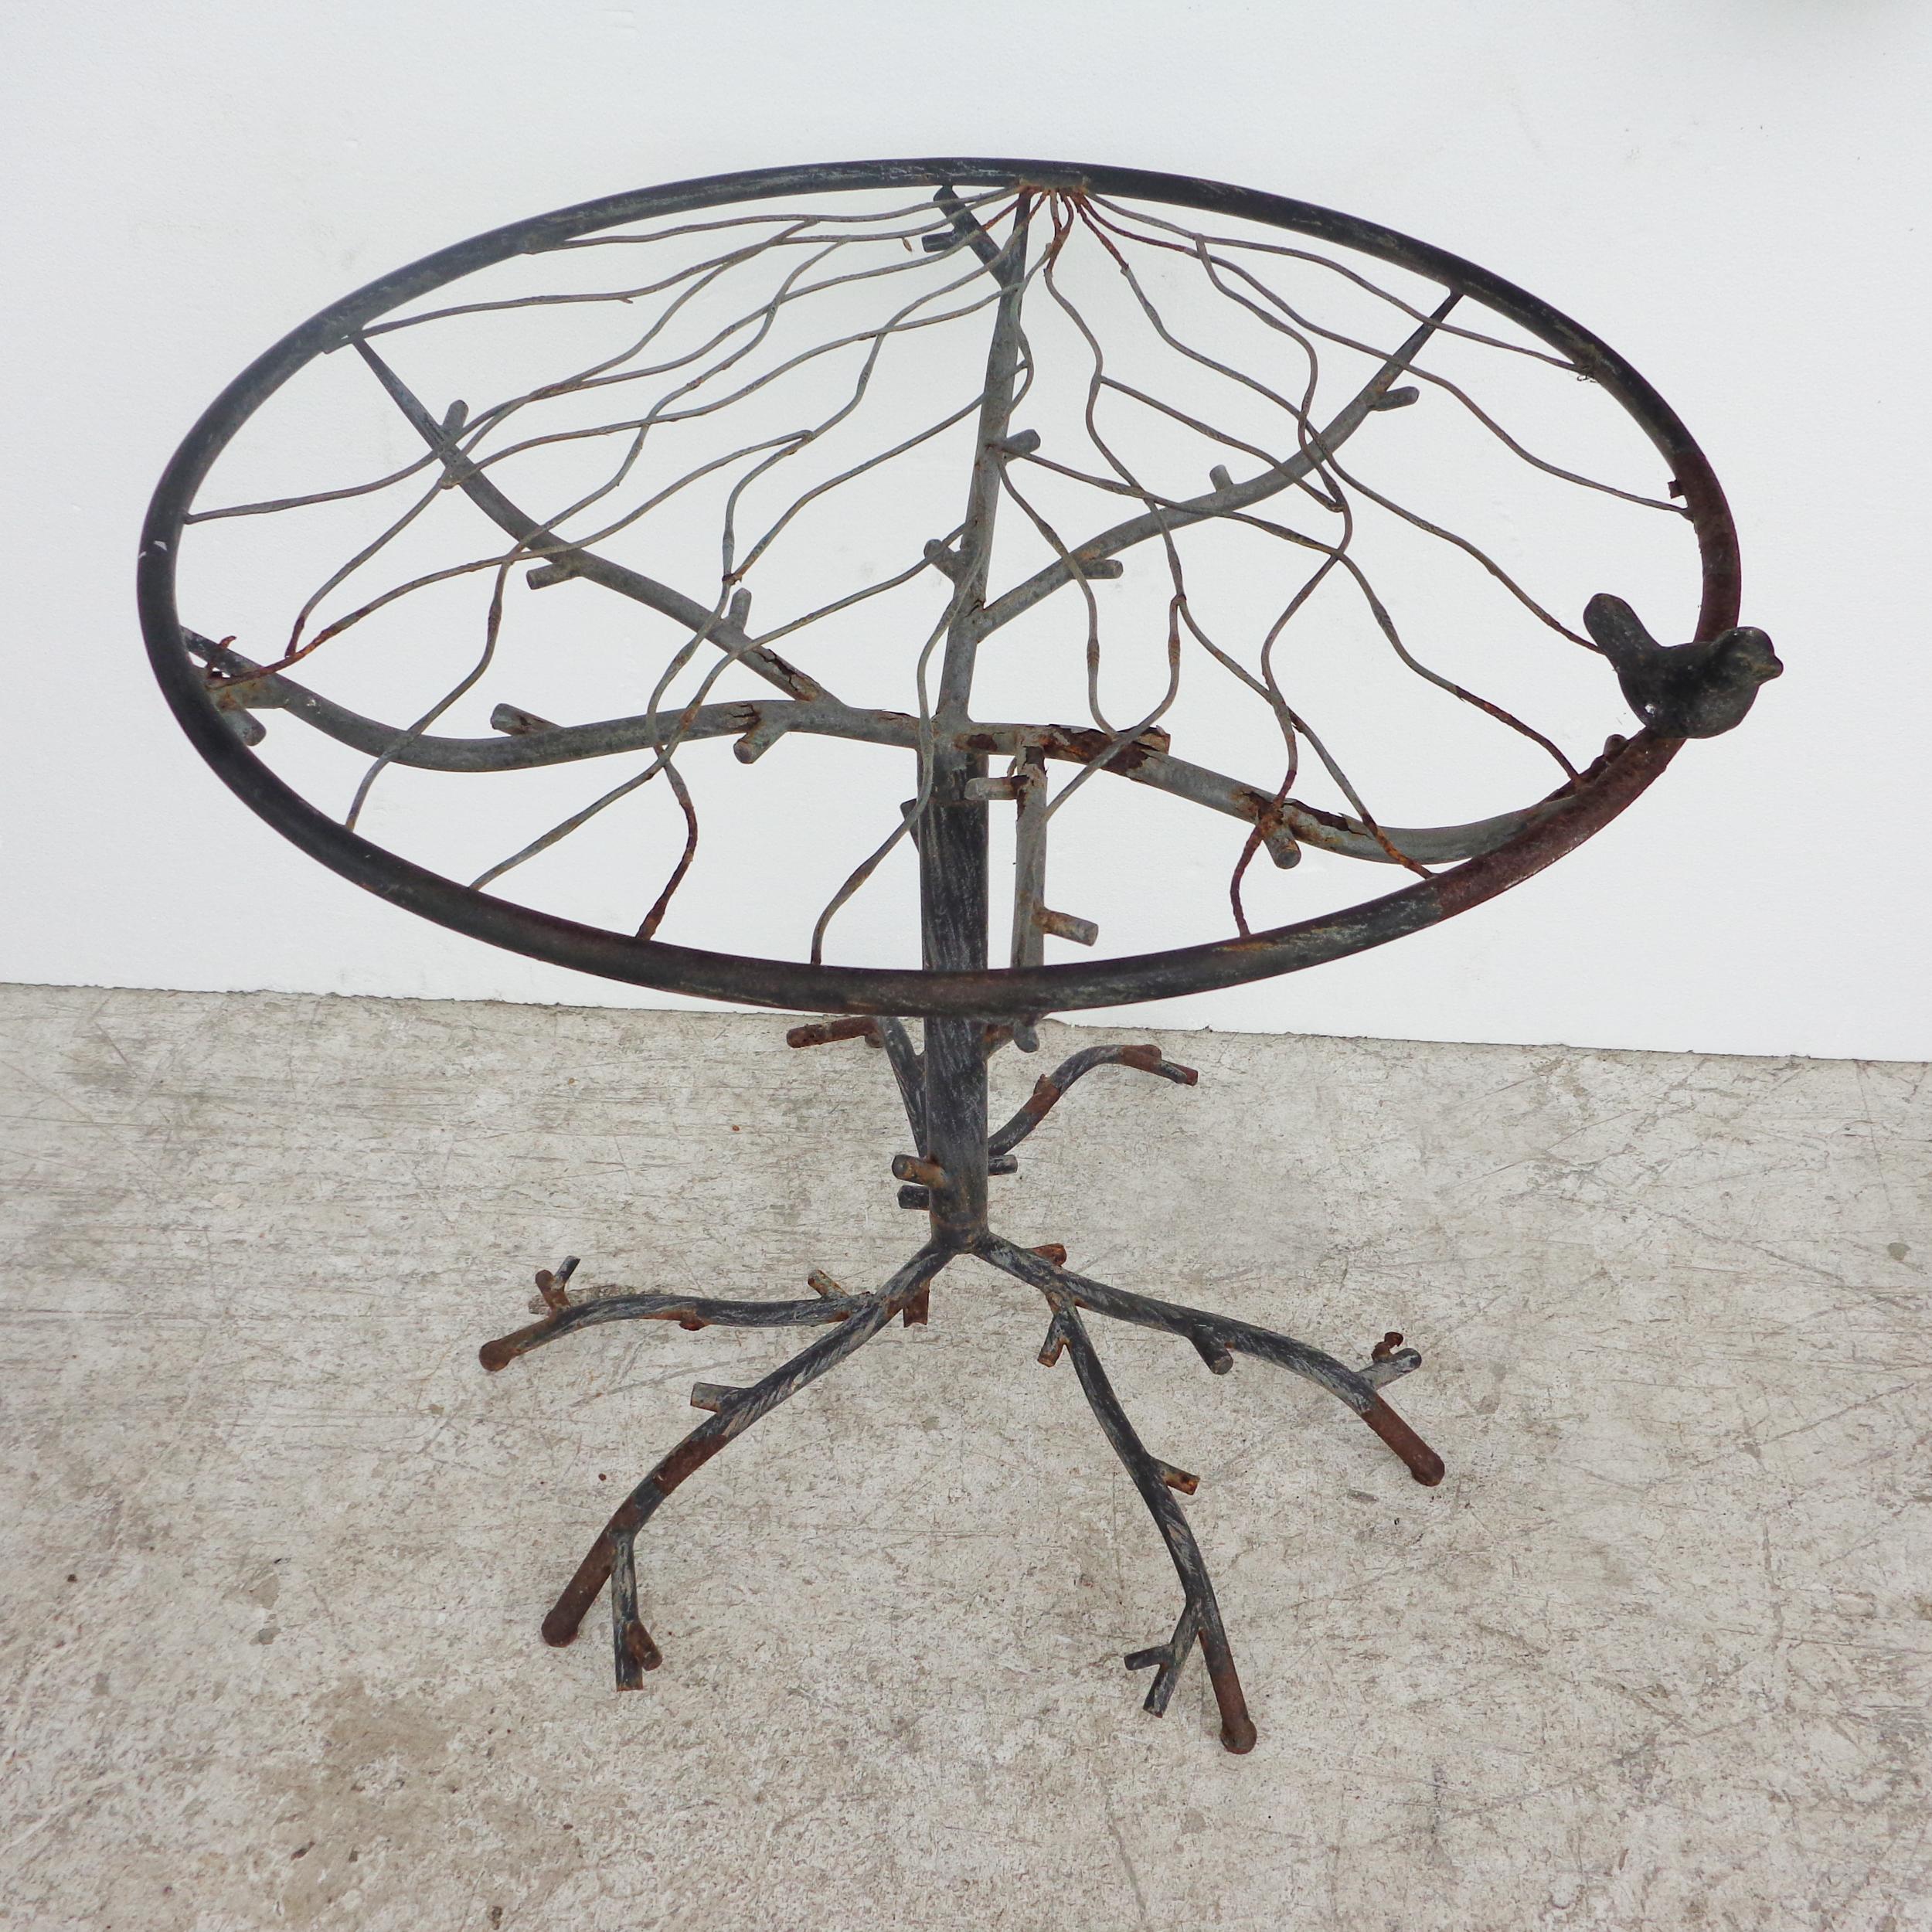 Cafe table in the manner of Diego Giacometti

Beautiful hand forged iron table with glass top 
Features carved tree branches under glass and at base with a small bird on the top.
 